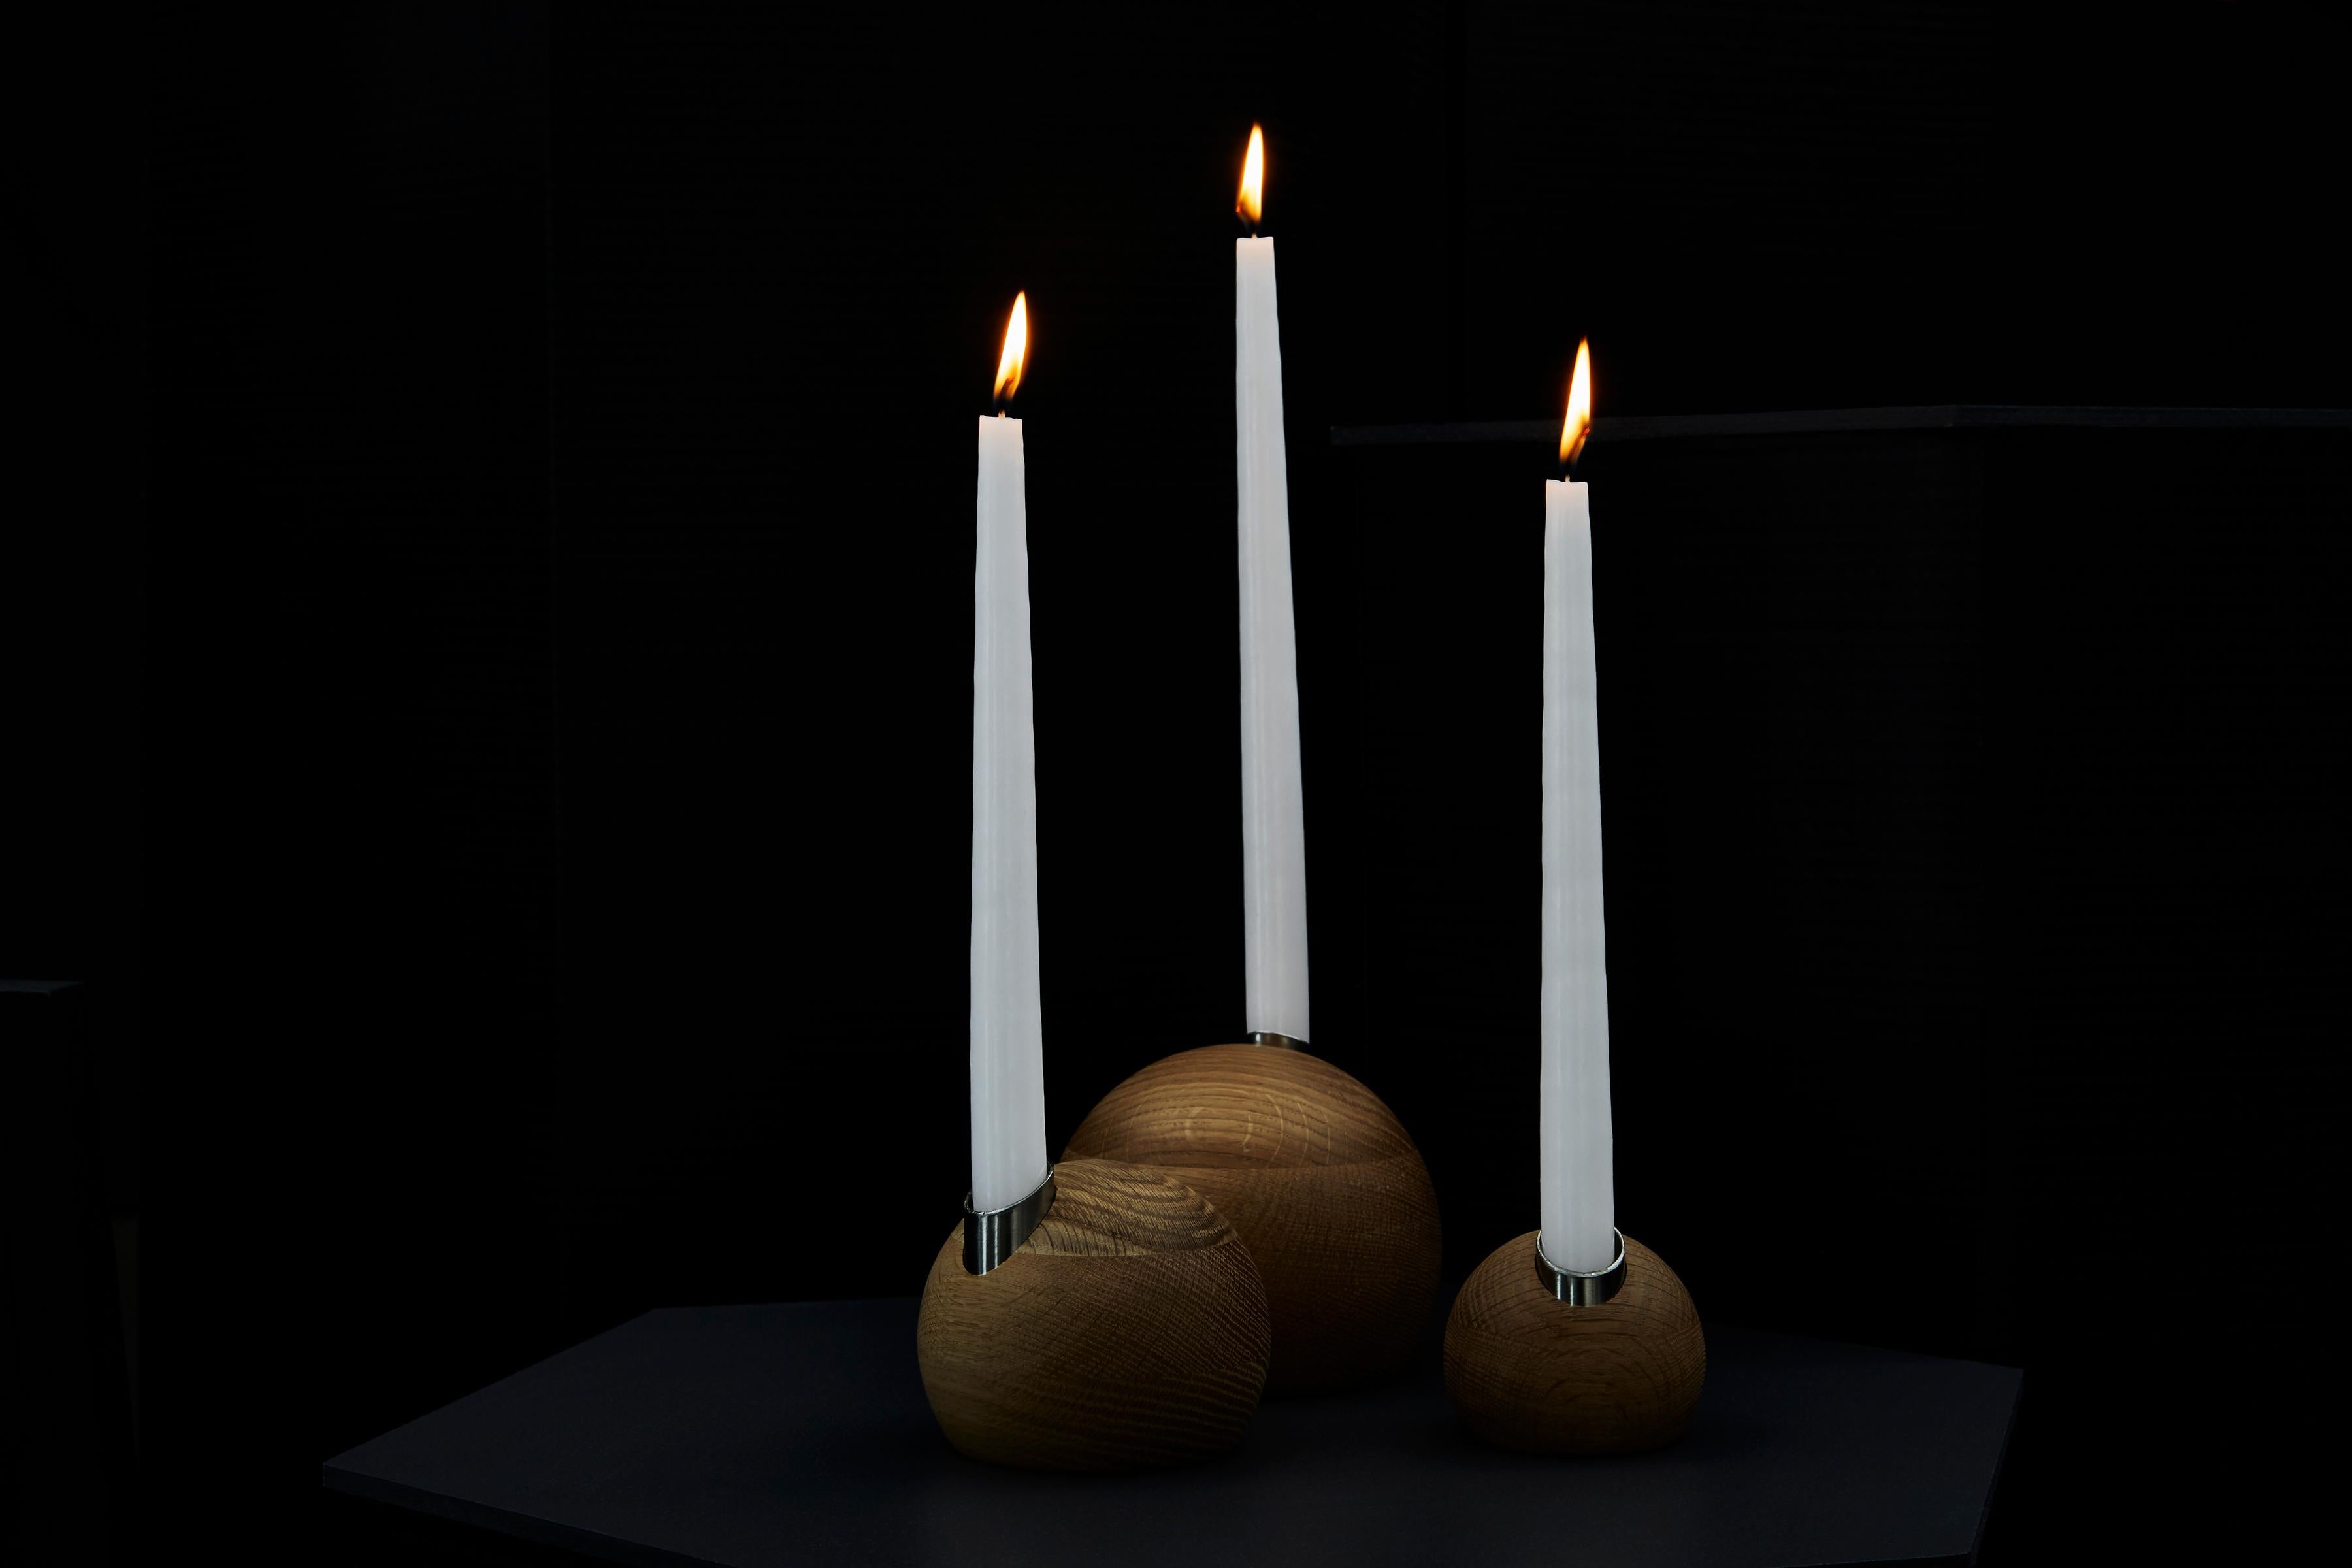 Oak Set of 3 Pebble Candle Holders by Hollis & Morris For Sale